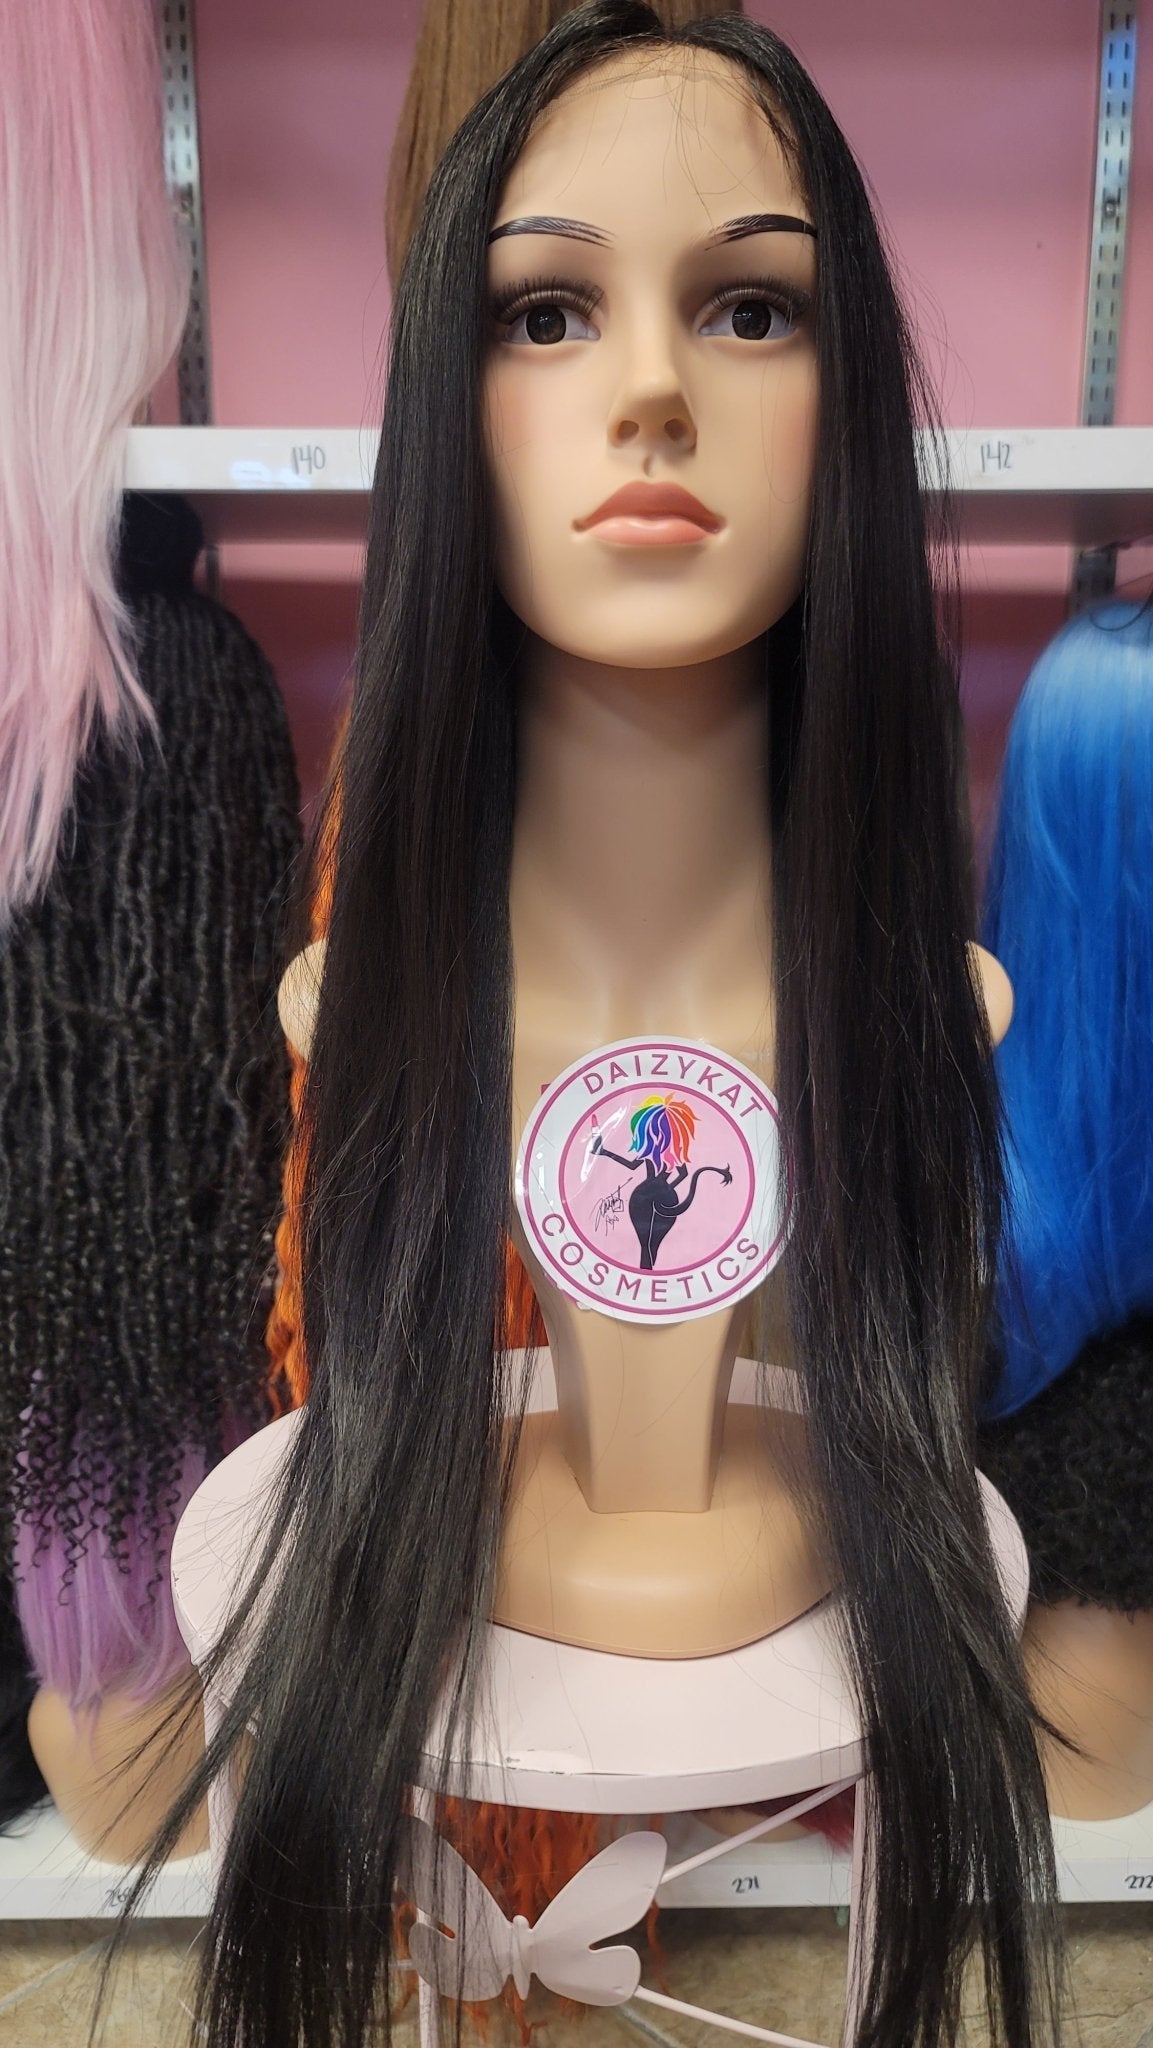 439 KELLY - Middle Part Lace Front Wig Human Hair Blend- 2 - DaizyKat Cosmetics 439 KELLY - Middle Part Lace Front Wig Human Hair Blend- 2 DaizyKat Cosmetics Wigs